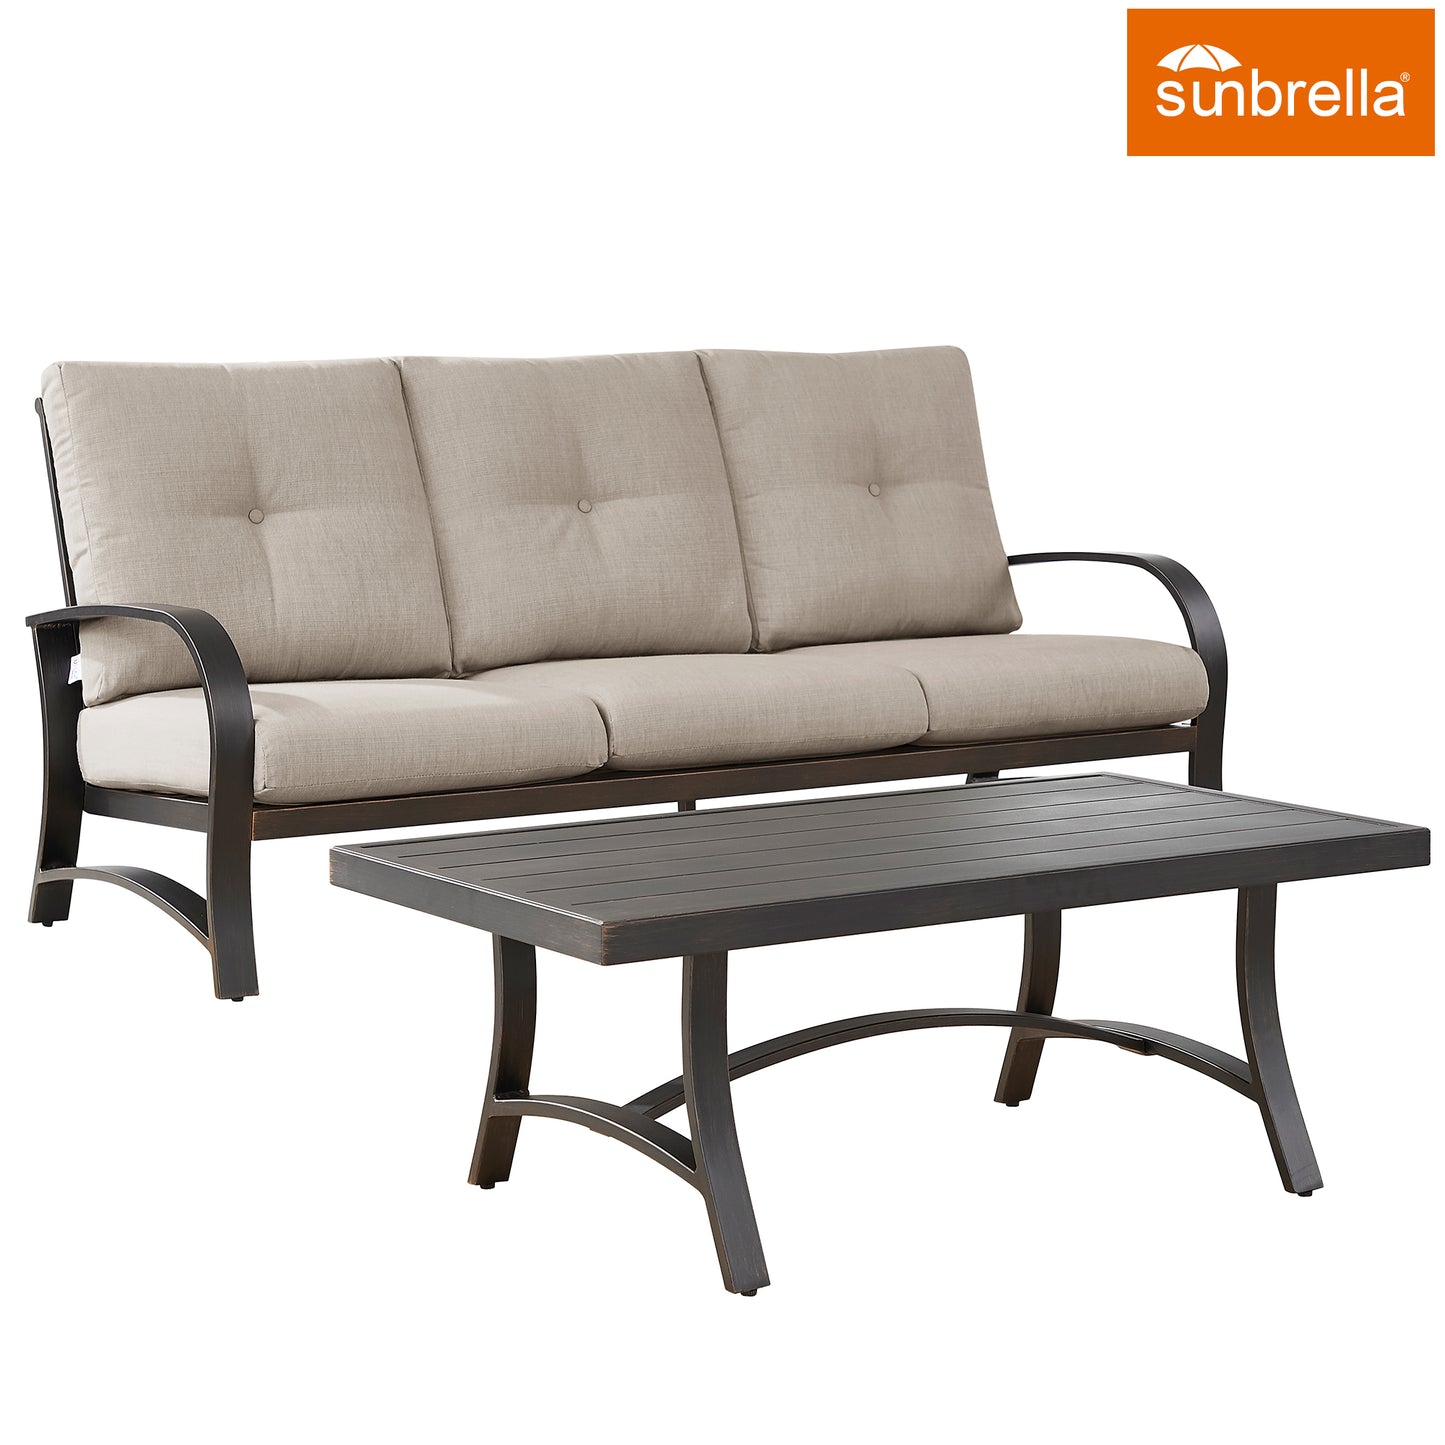 2 Pieces Outdoor/Indoor Aluminum Patio Conversation Seating with Sunbrella Cushions and Coffee Table